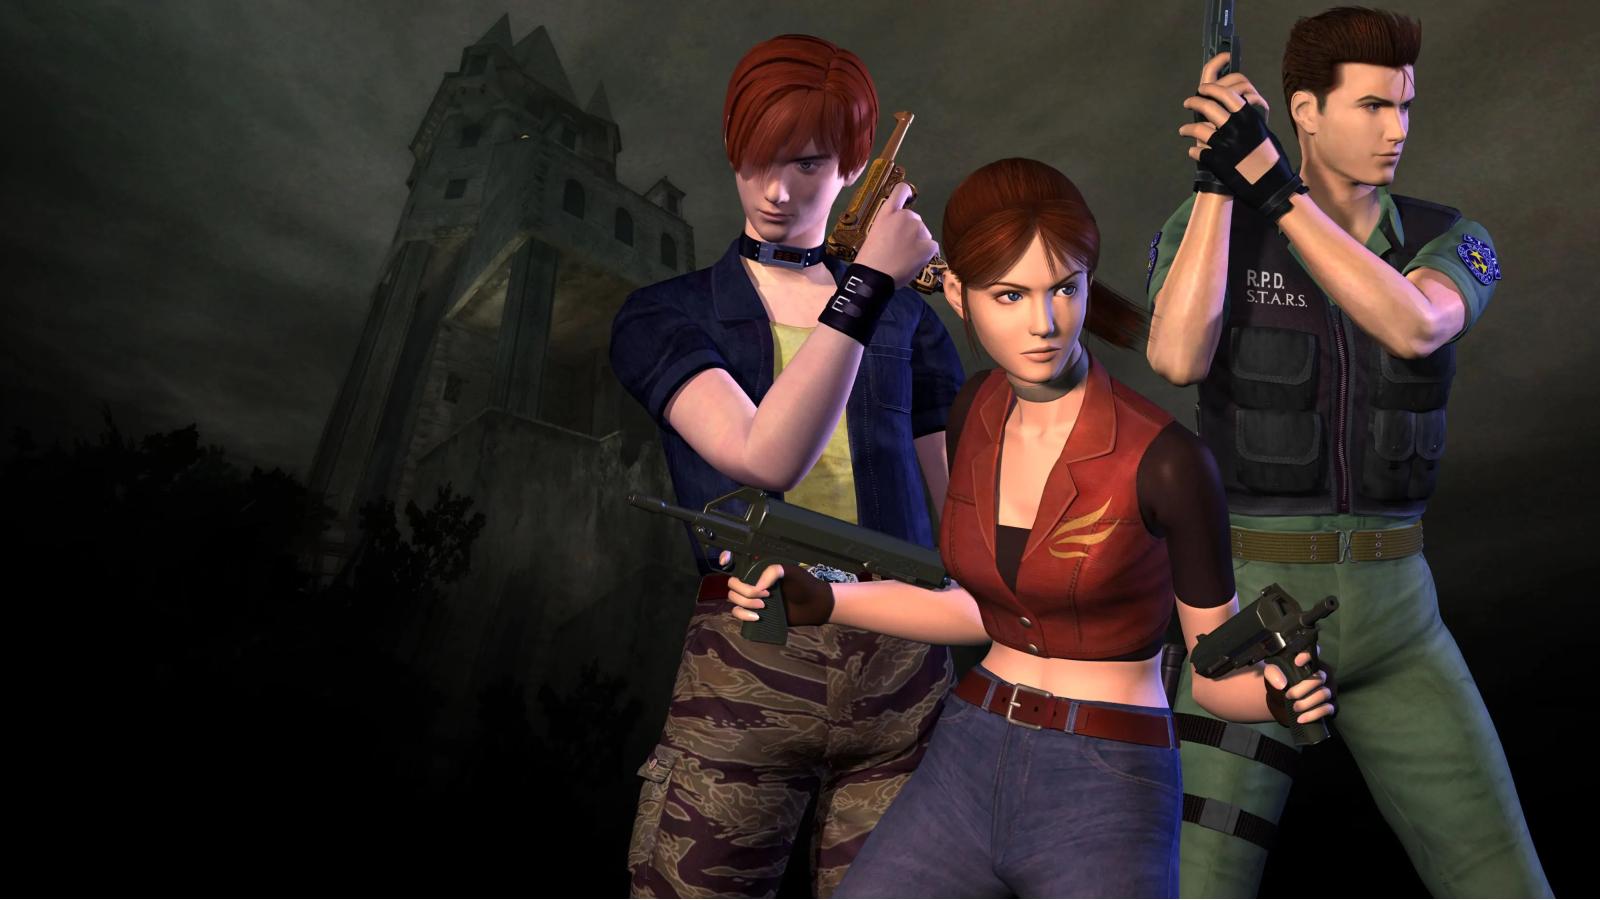 RESIDENT EVIL CODE VERONICA: REMAKE  CAPCOM Says NOW Is The Time! 